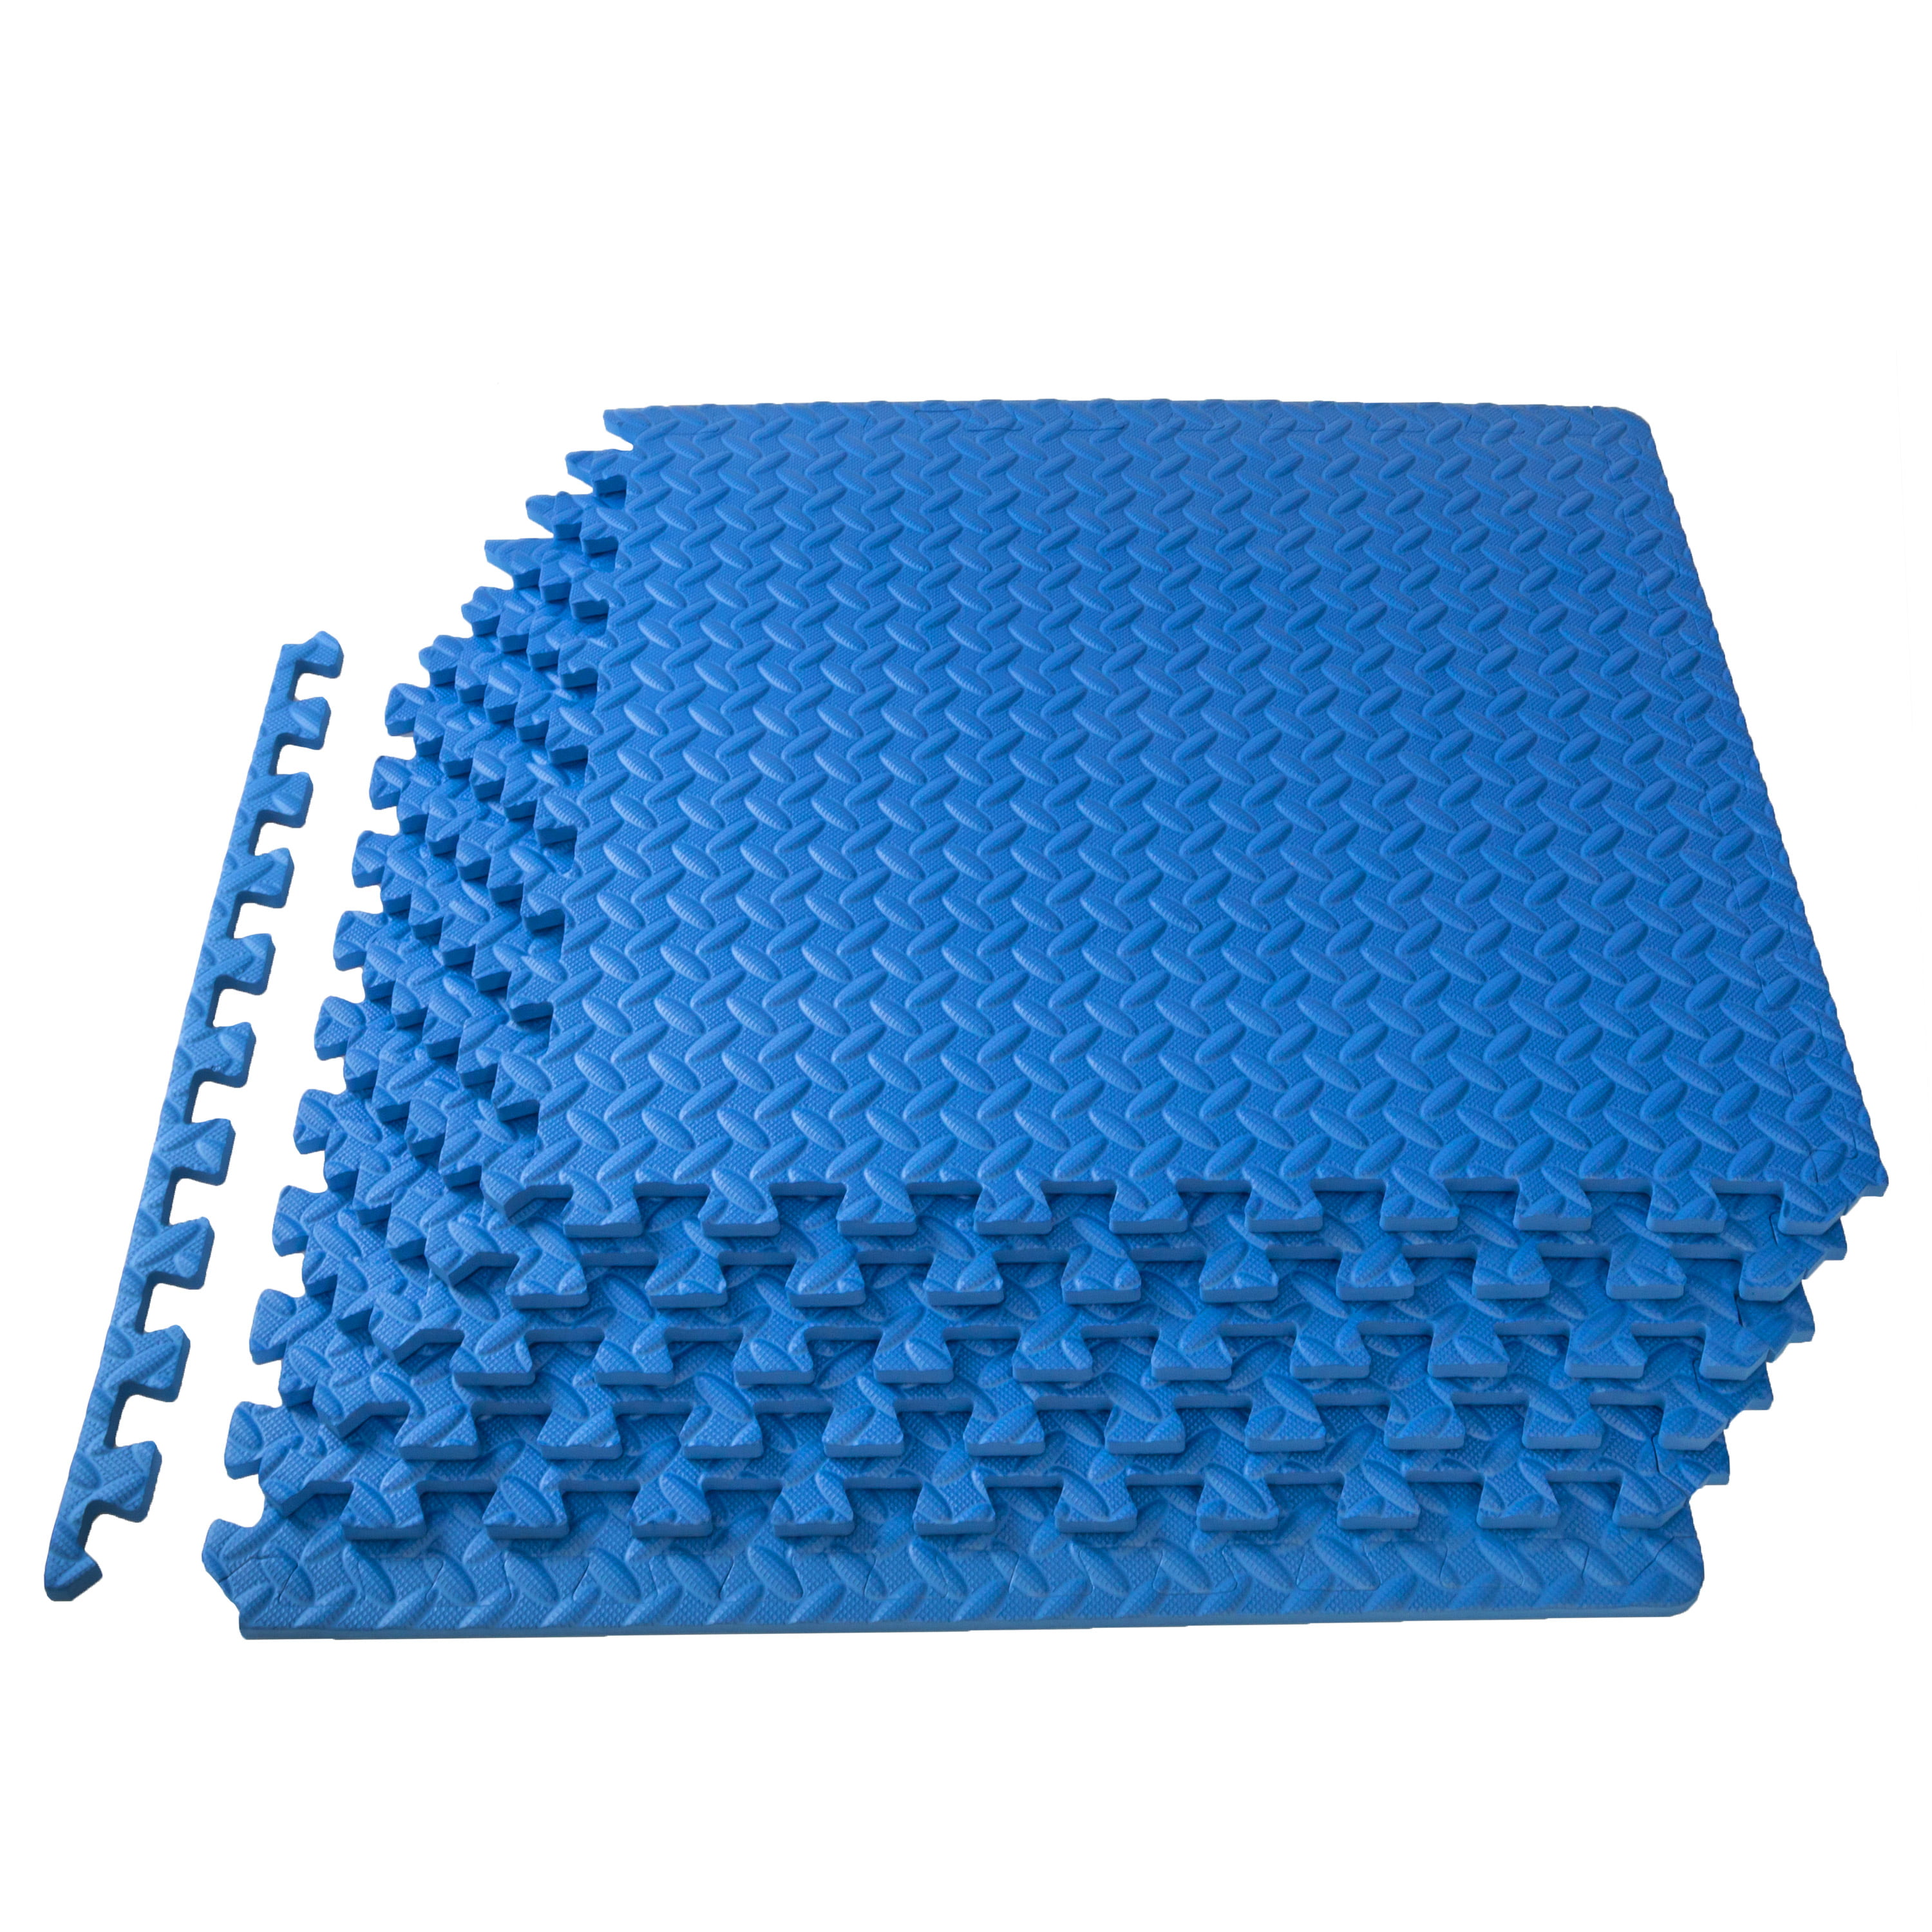 ProsourceFit Puzzle Exercise Mat ½” EVA Foam Interlocking Tiles Protective Flooring for Gym Equipment and Cushion for Workouts 